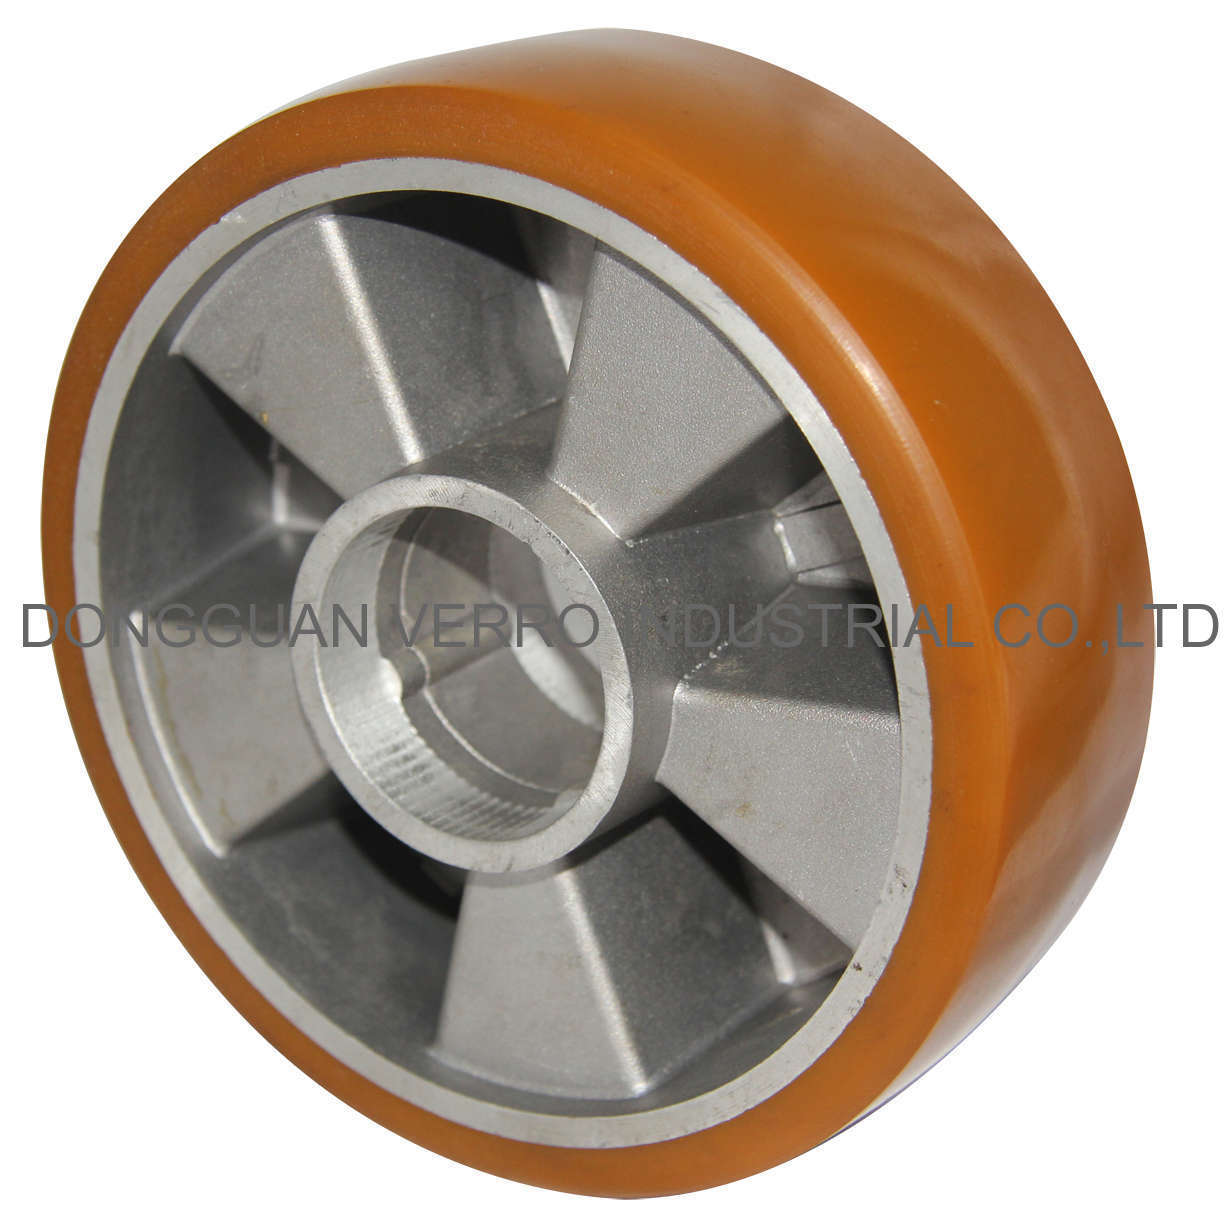 Wheels with thermoplastic polyurethane tread, with aluminum wheel center